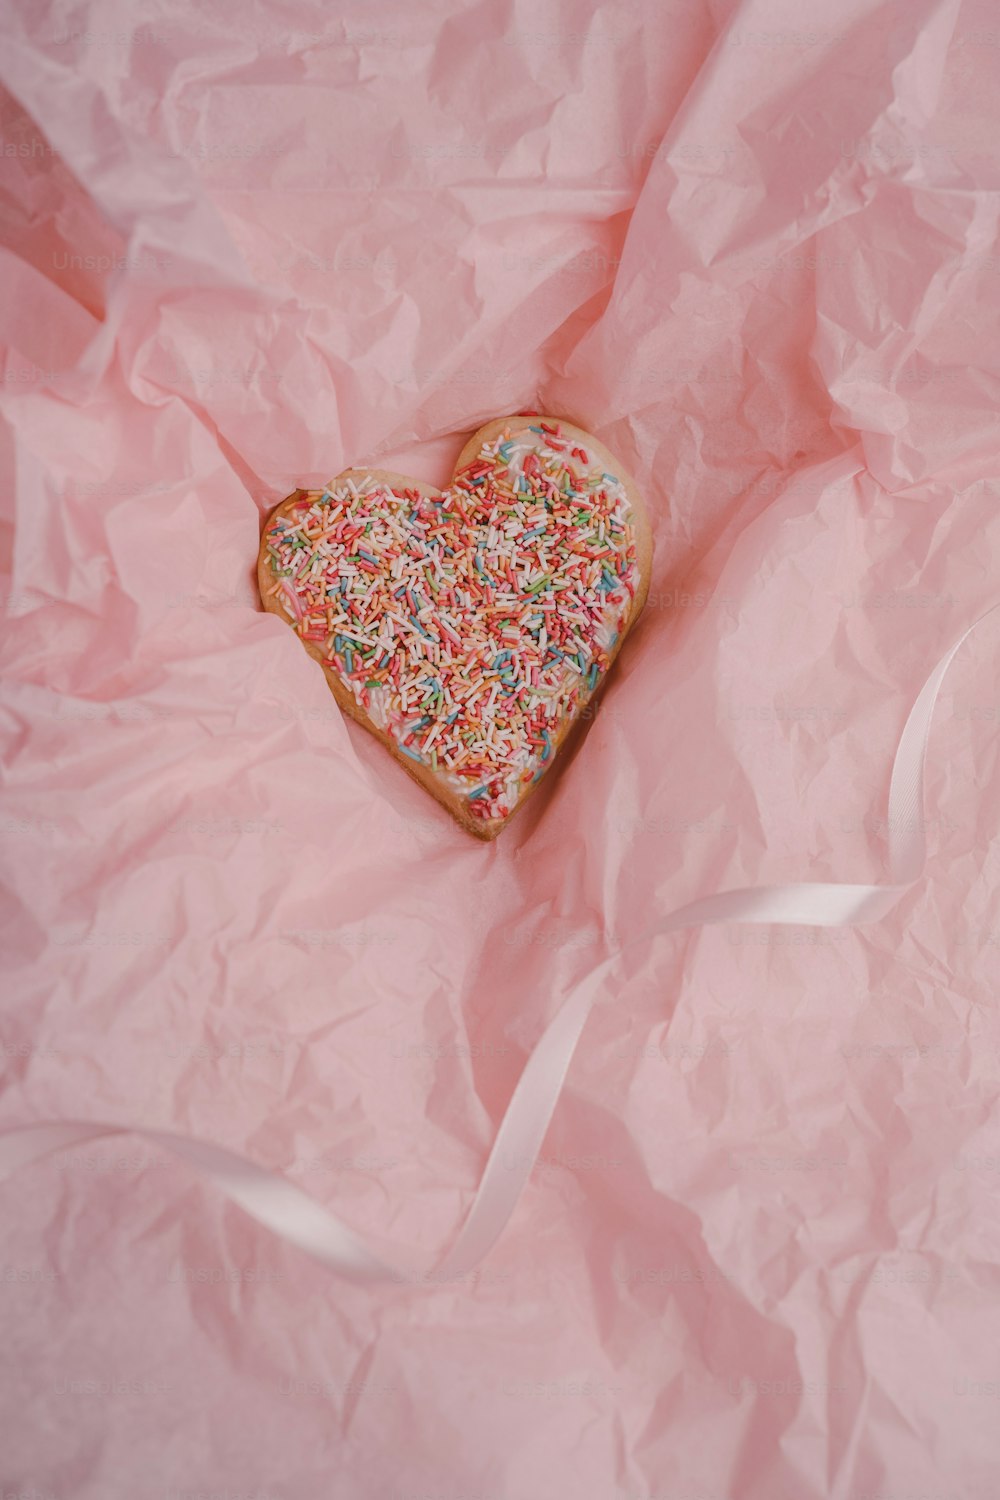 a heart shaped cookie with sprinkles on a pink background